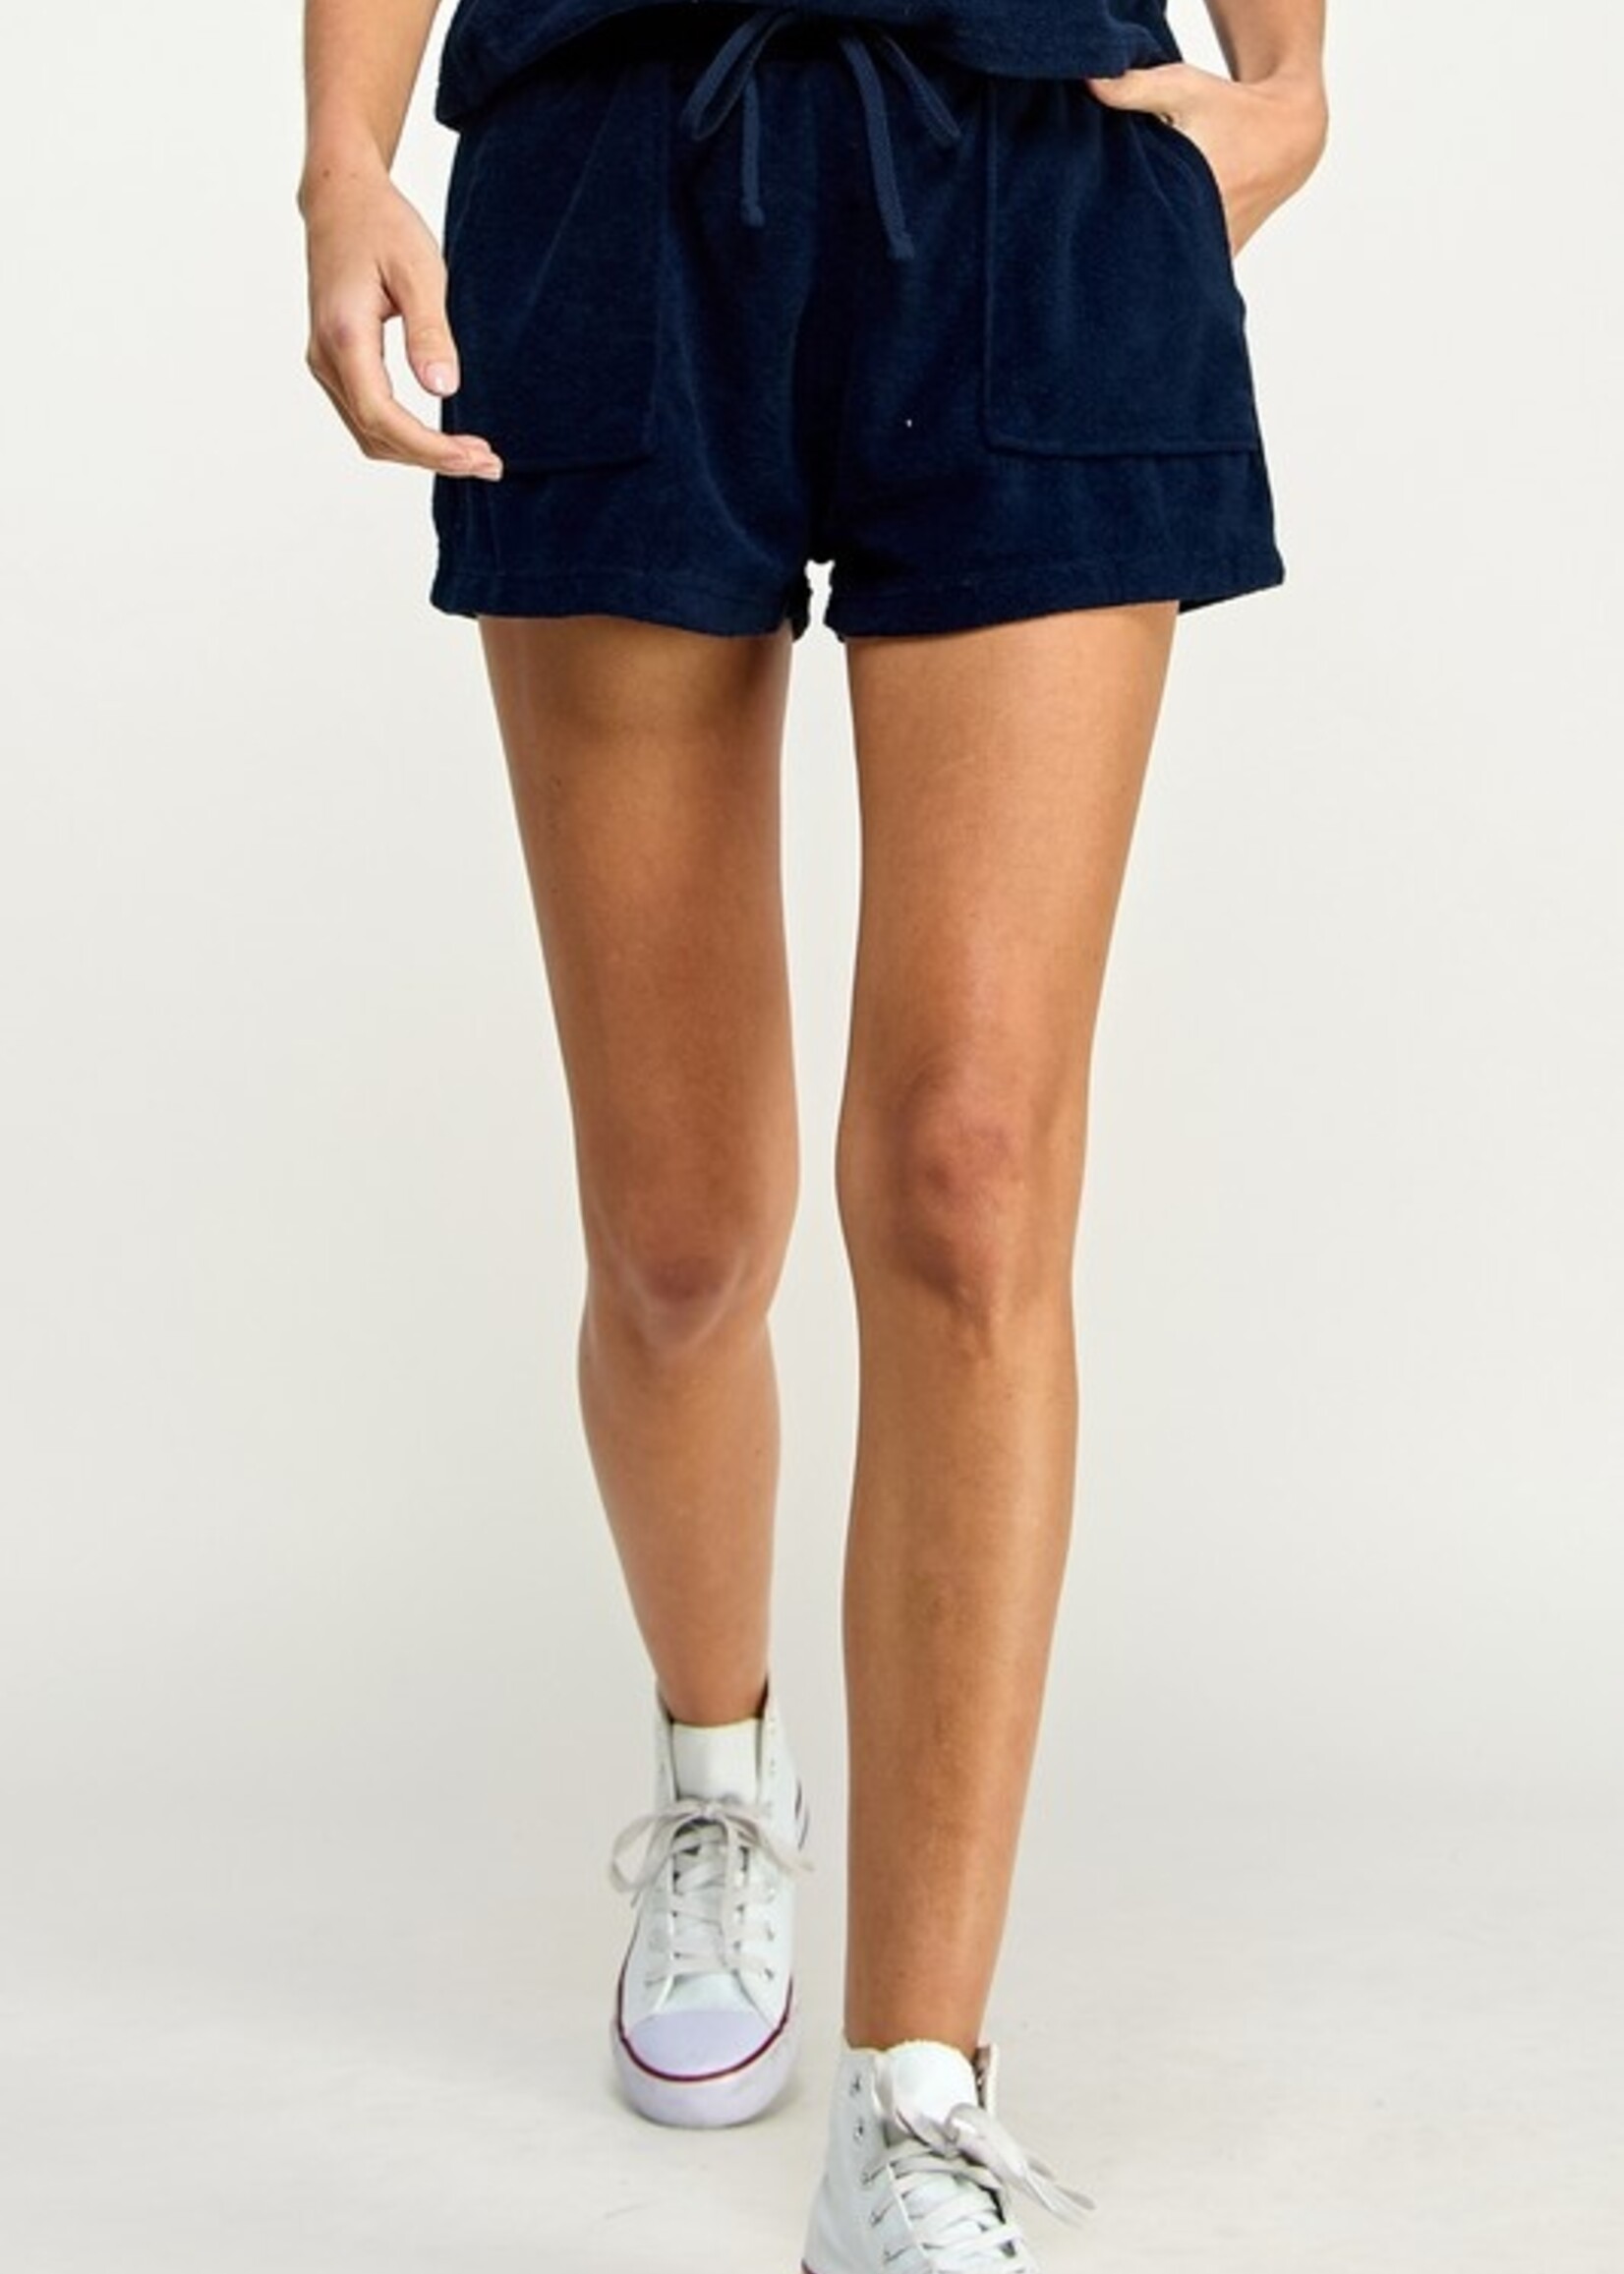 Terry shorts +3 colors